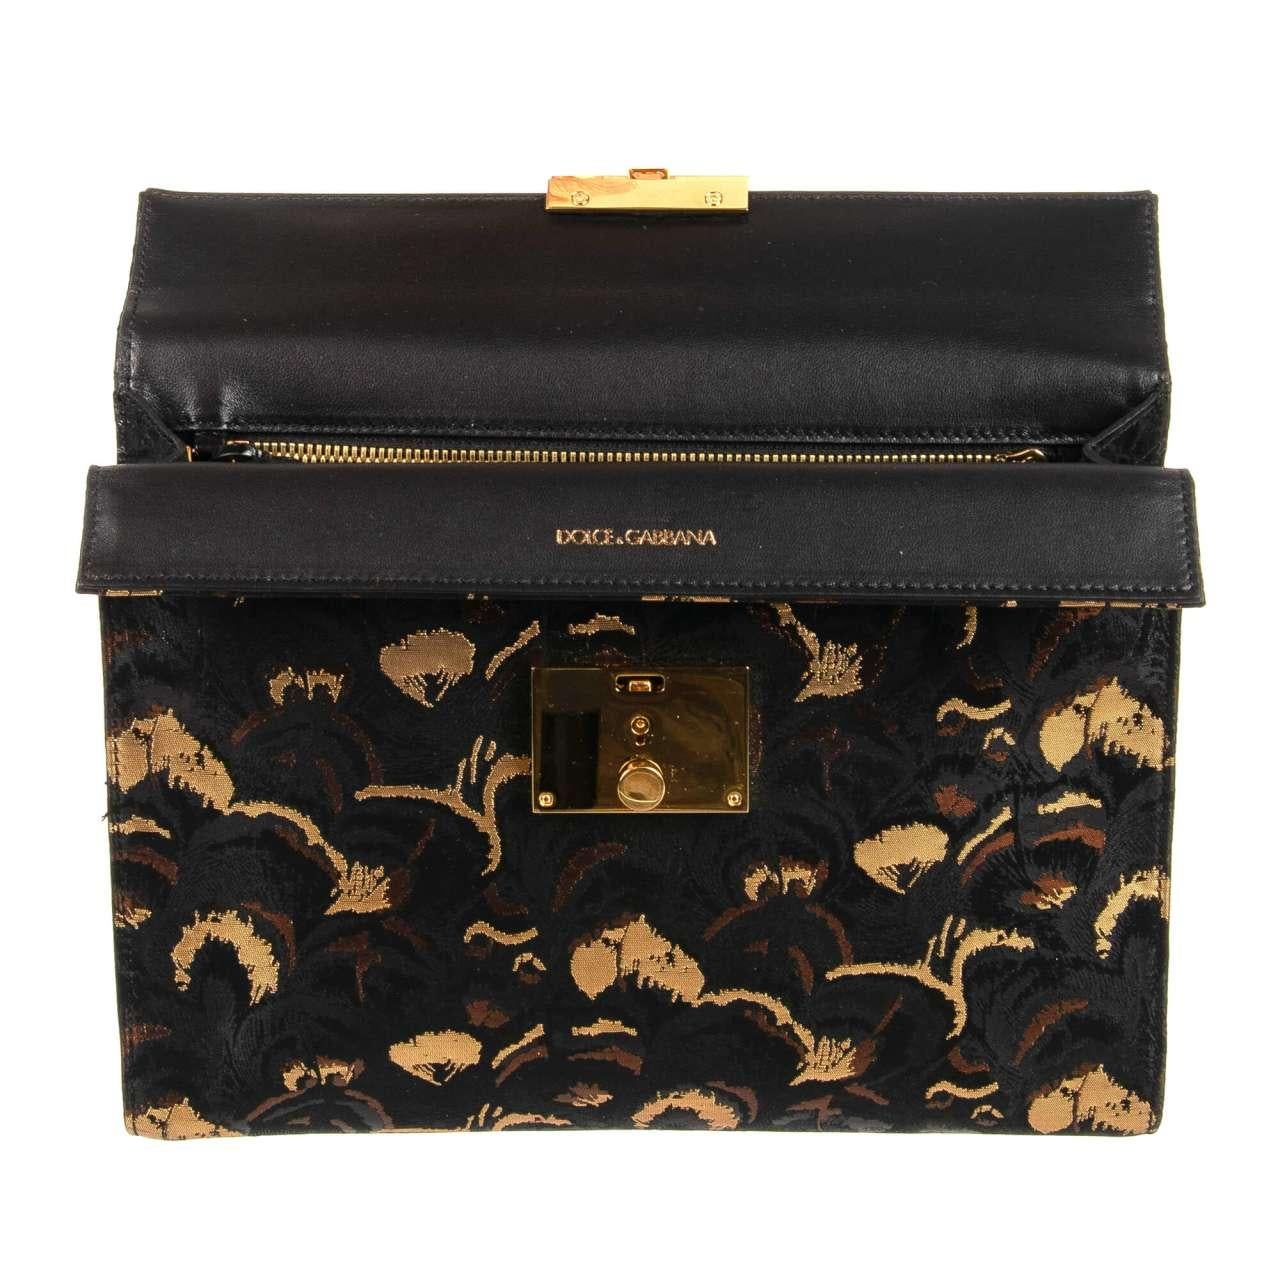 Dolce & Gabbana Textured Lurex and Caiman Leather Briefcase Bag Black Gold For Sale 1